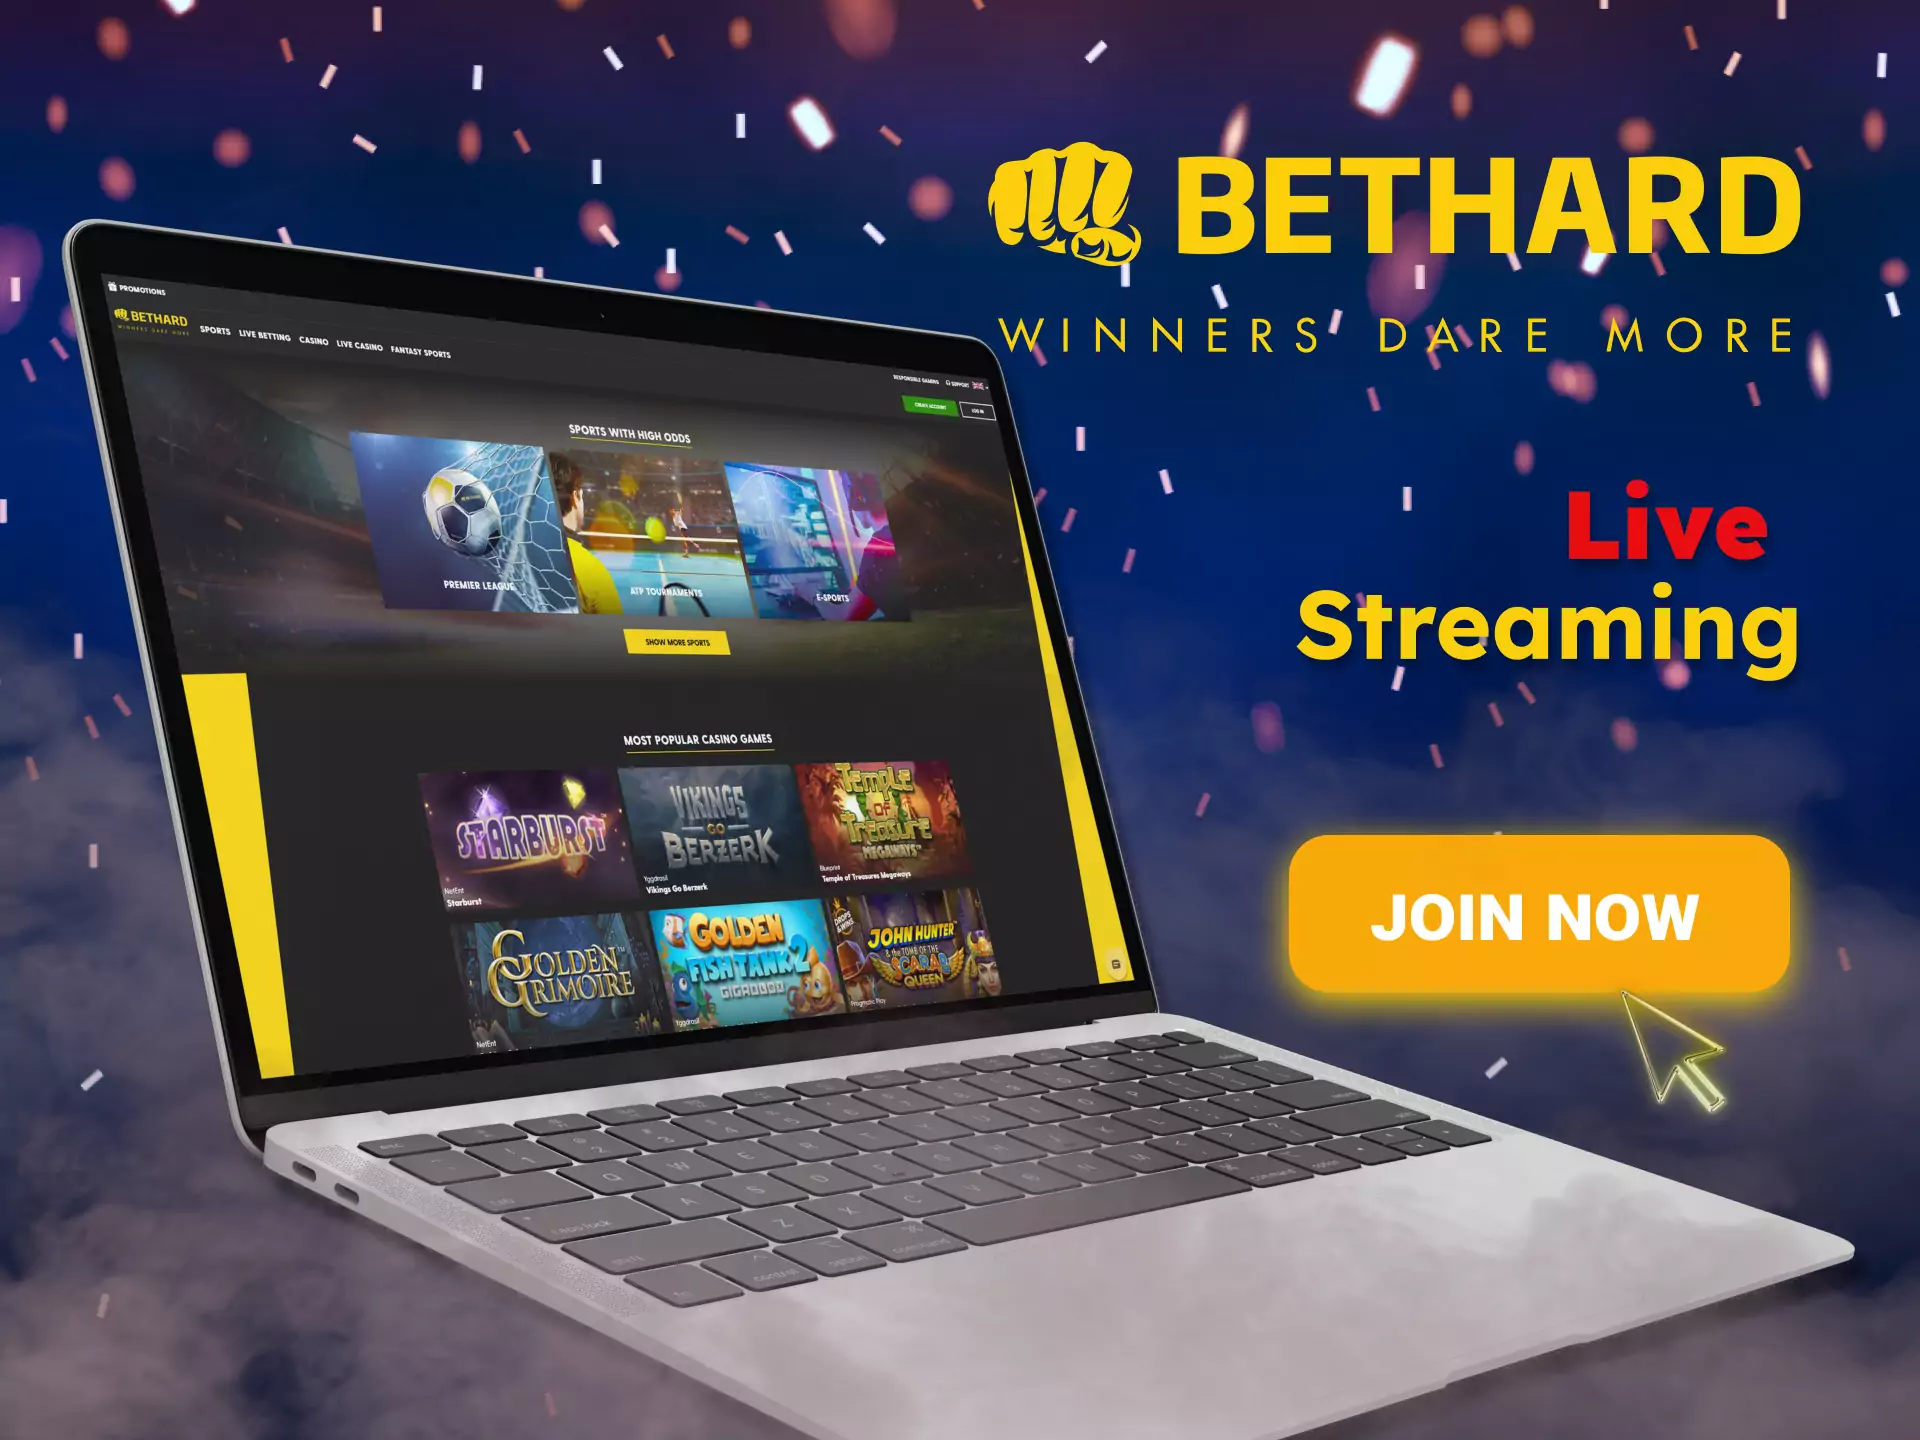 Watch matches of your favorite teams live streaming and place bets with Bethard.